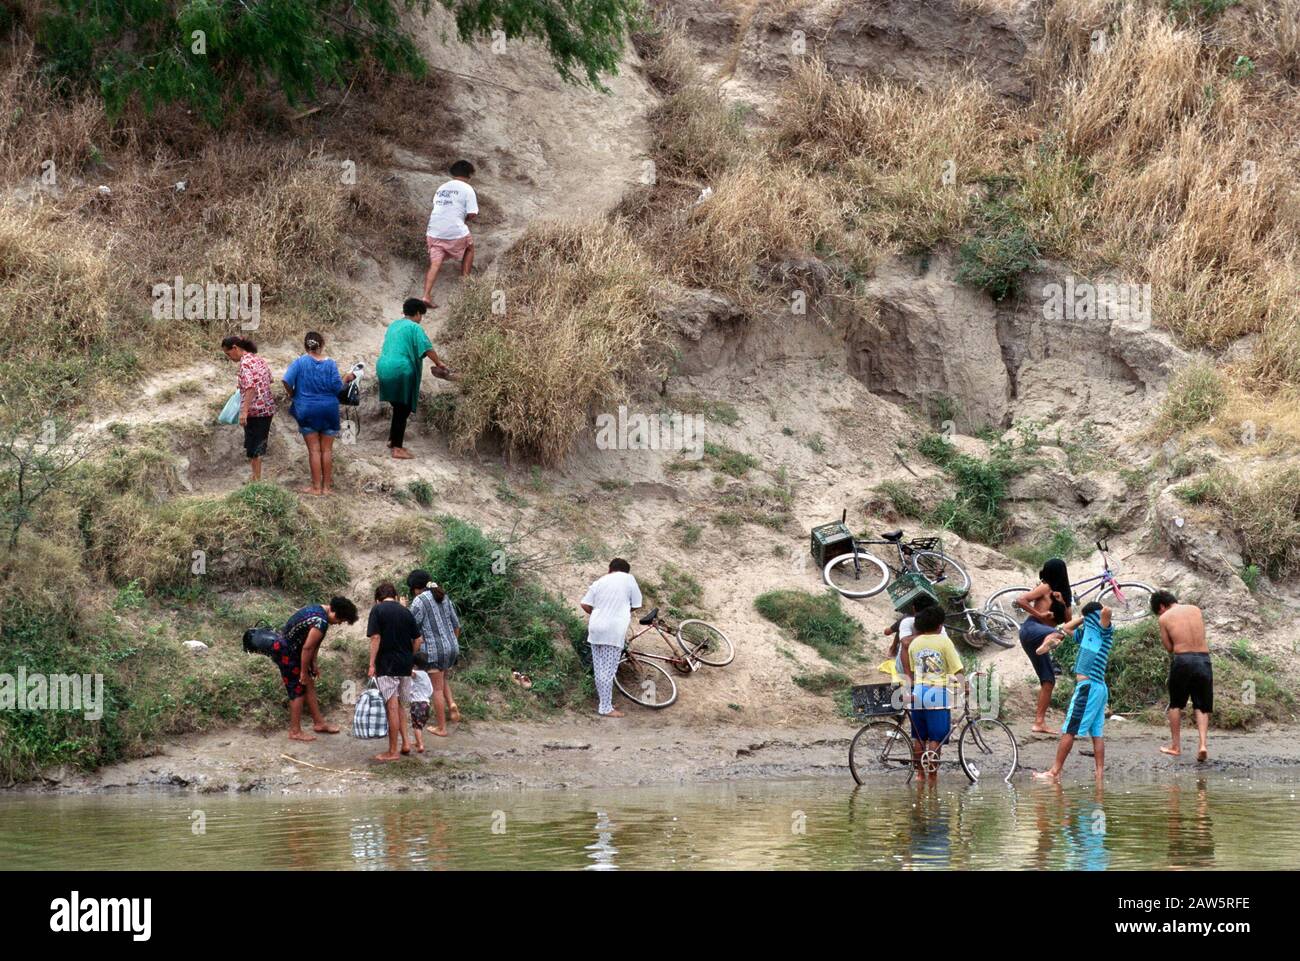 People climbing up a riverside bluff after crossing the Rio Grande from the United States into Mexico, bypassing the official border crossing point from Brownsville, Texas, into Matamoros, Tamaulipas. Stock Photo